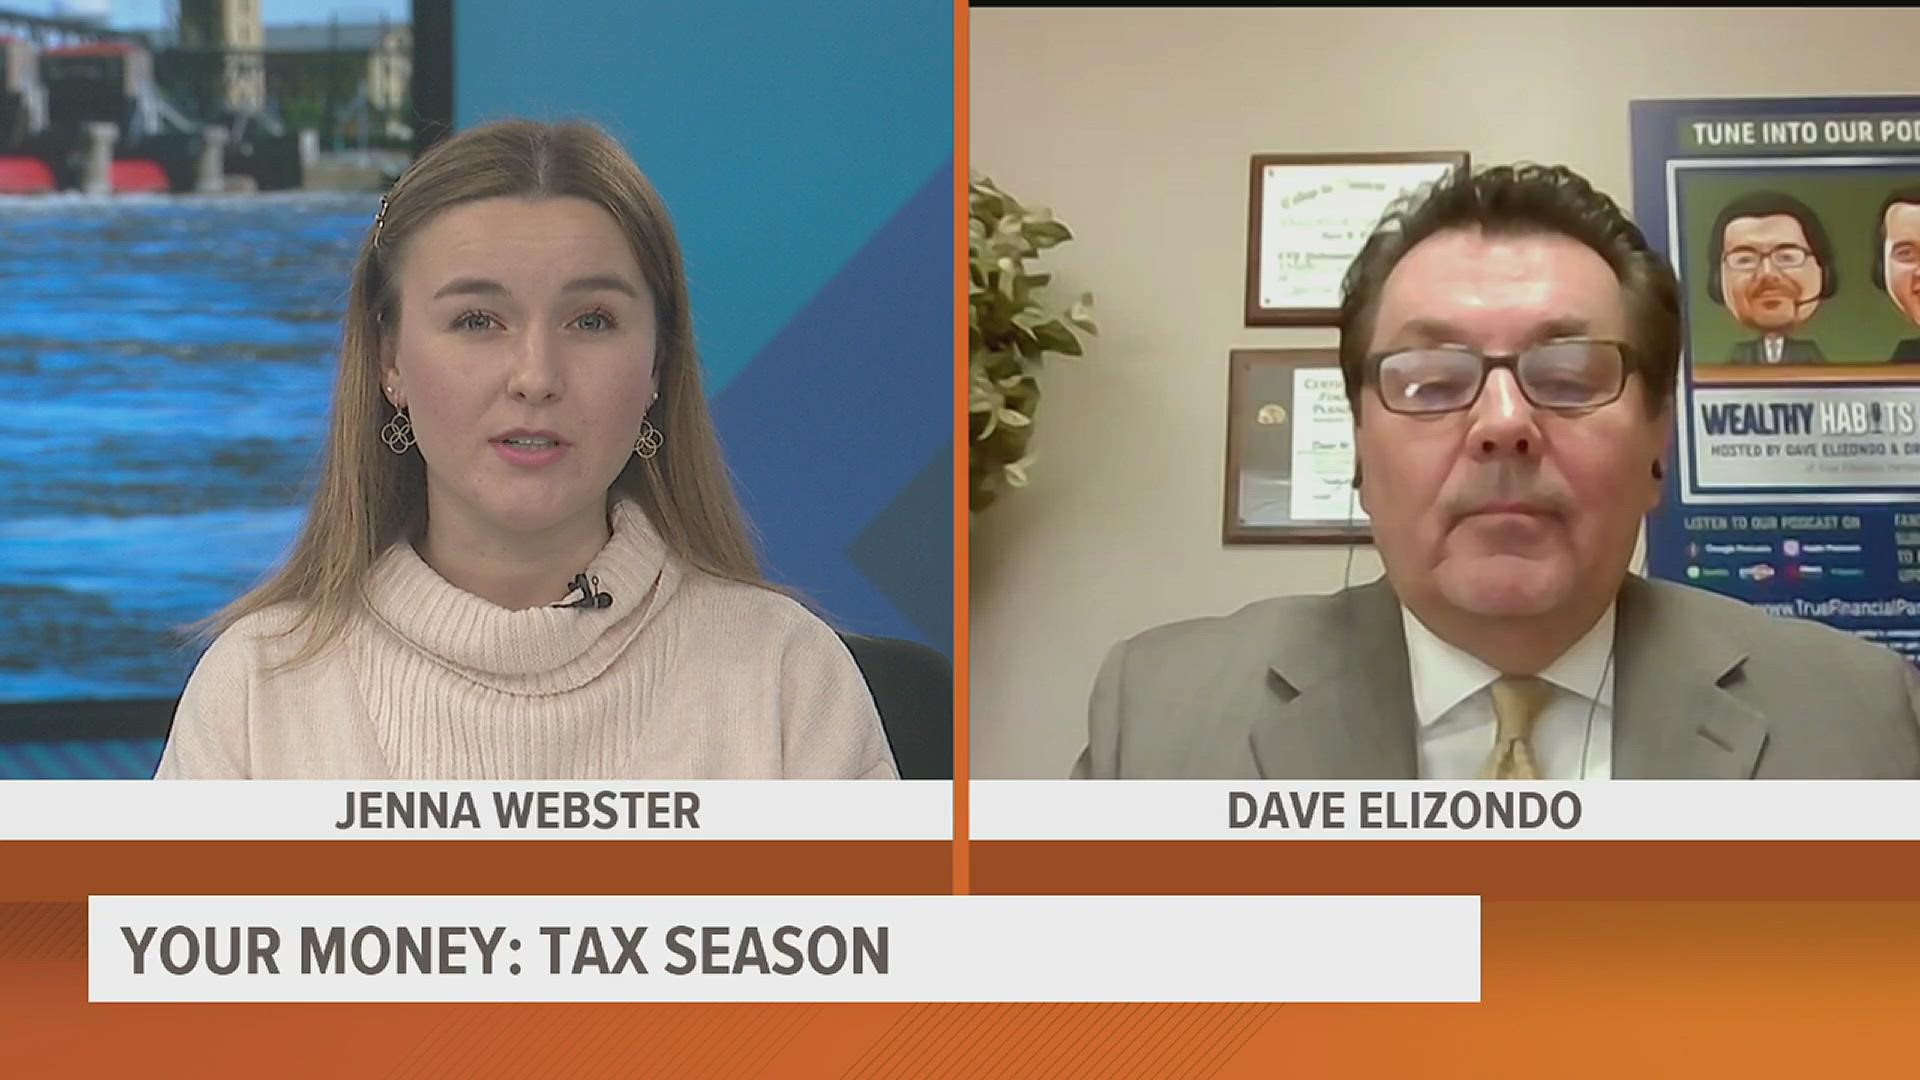 Dave Elizondo from True Financial joins News 8 to discuss new tax filing rules with tax season underway.